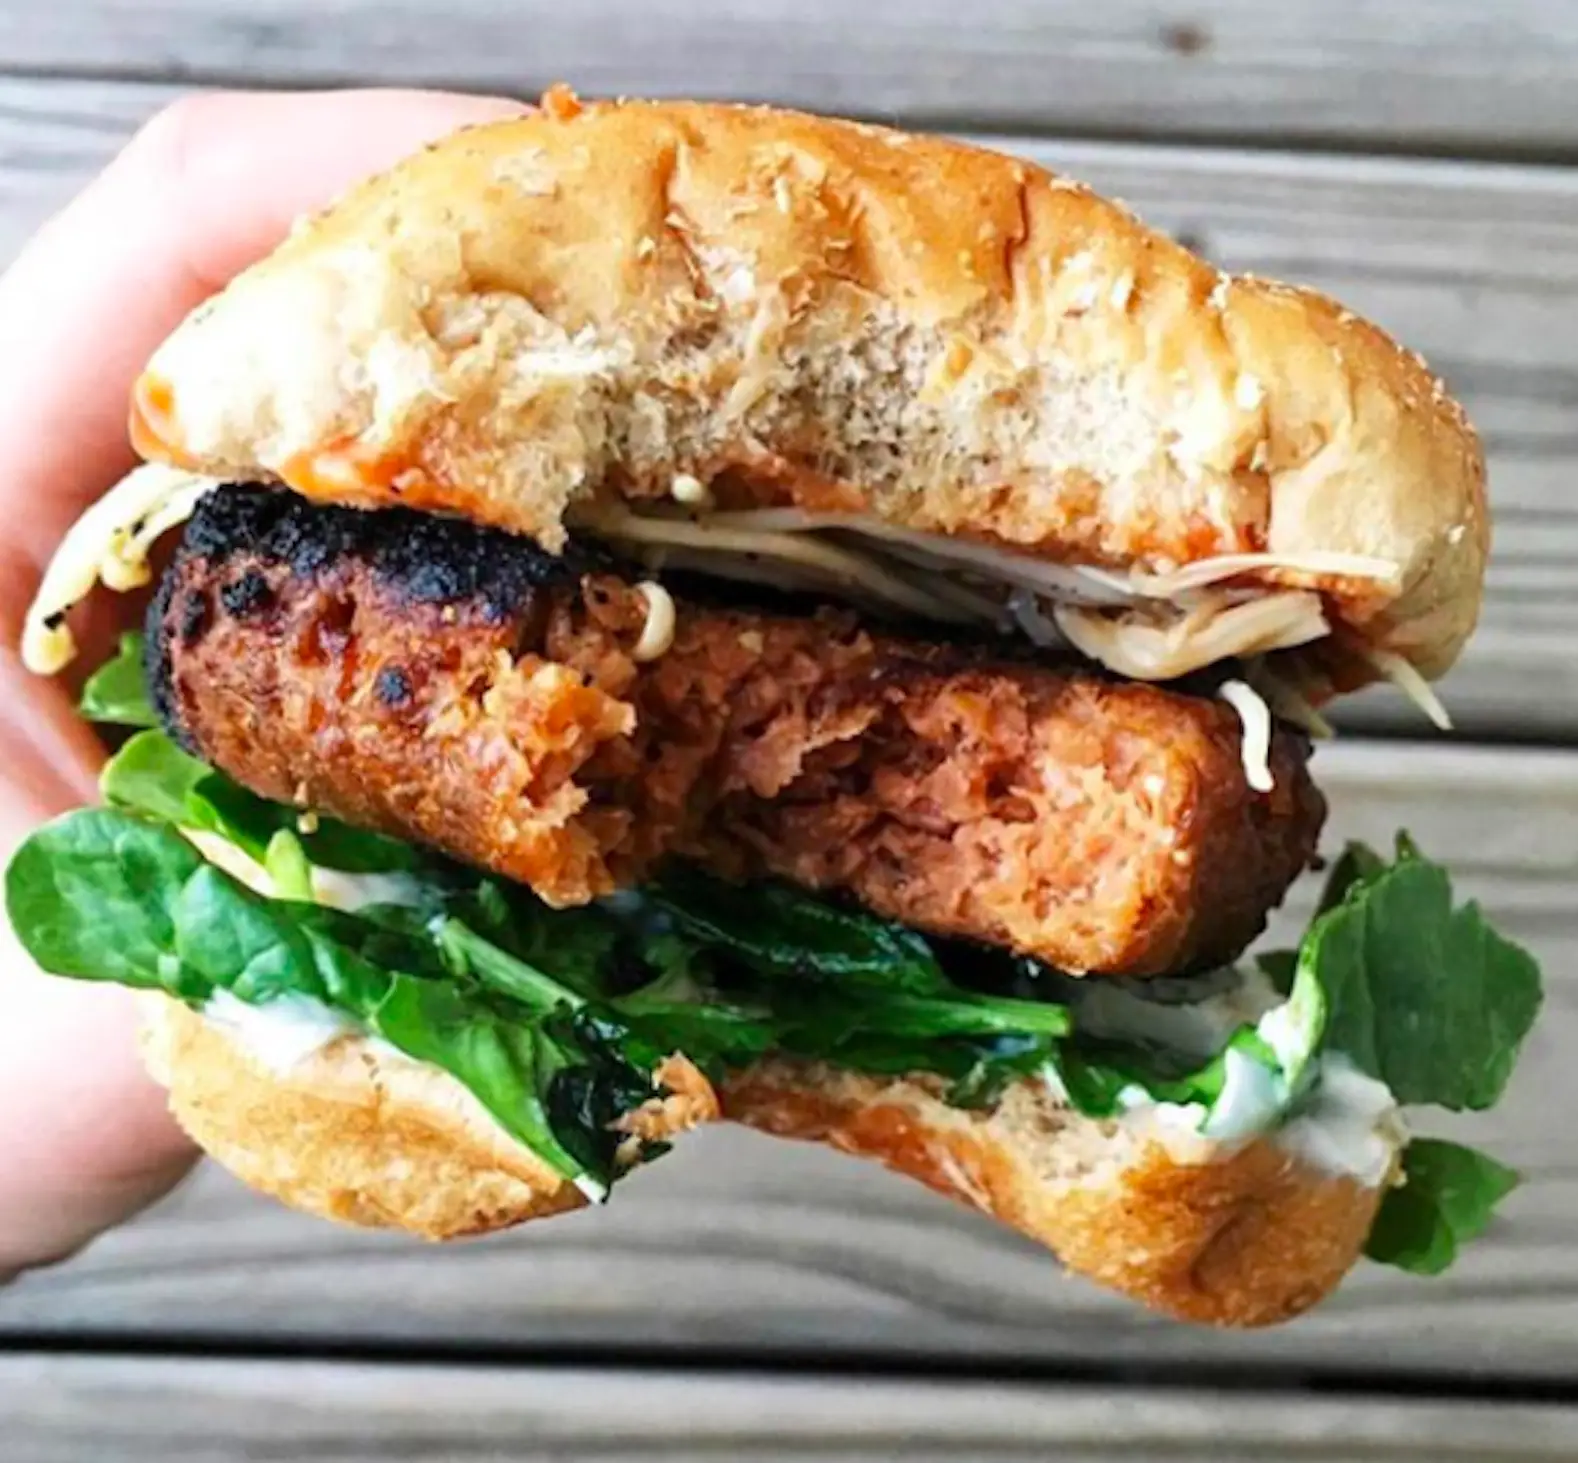 Vegan Beyond Burger Launches in 43 Luna Grill Locations